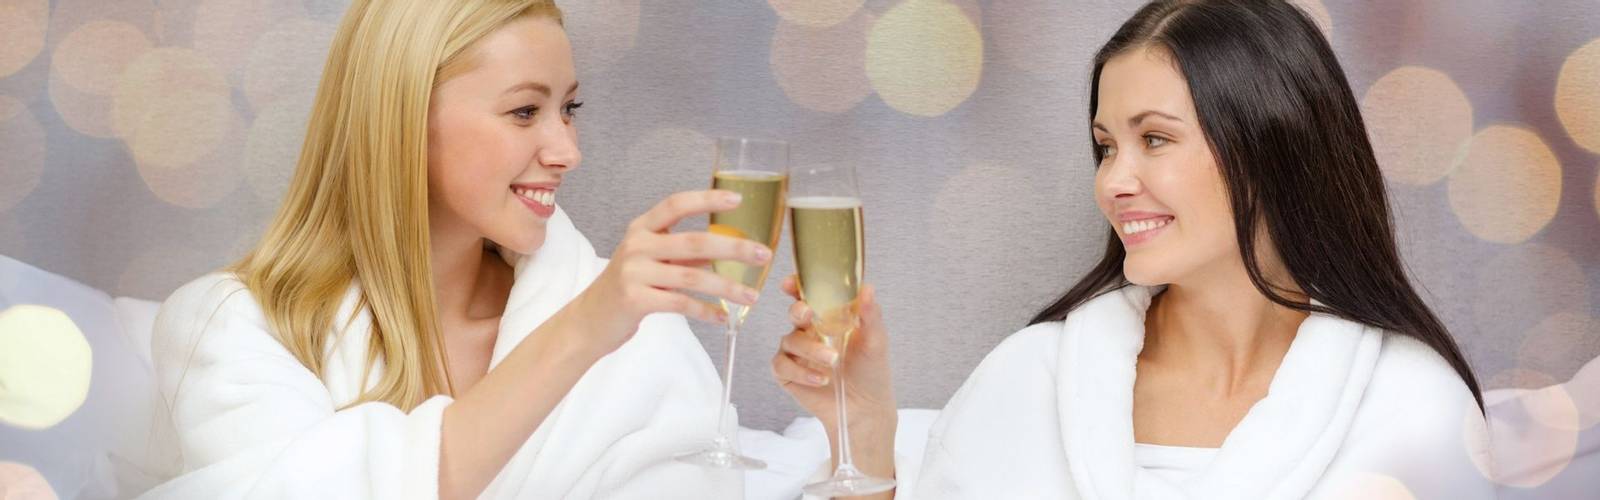 travel, celebration, friendship and holidays concept - smiling girlfriends in bathrobes with champagne glasses in bed at hot…